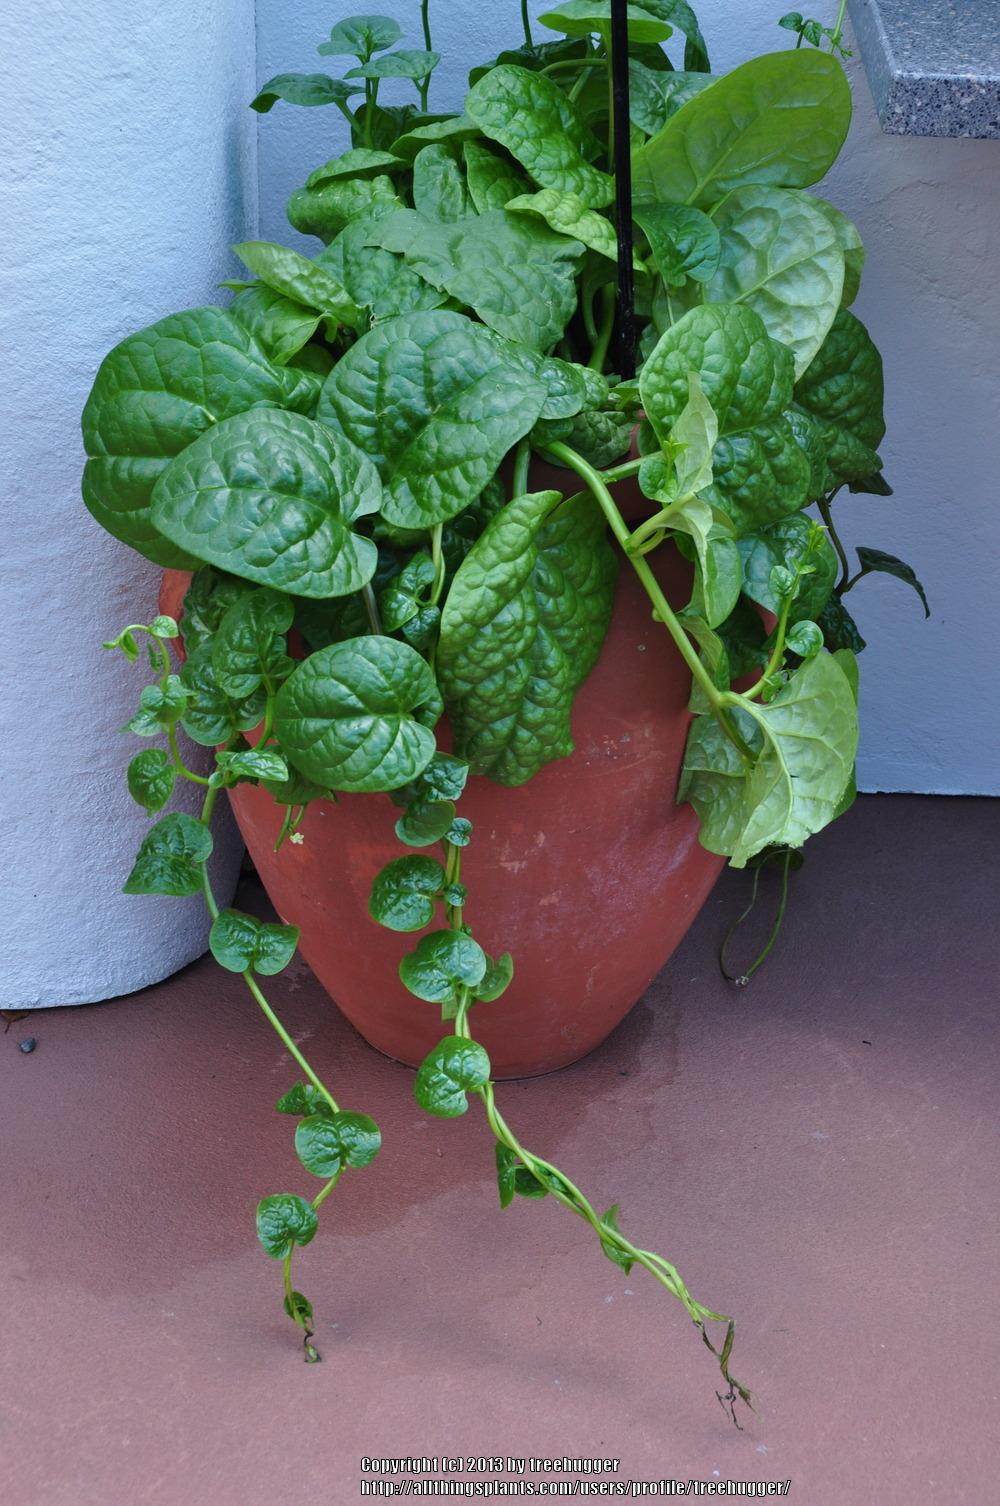 Try out Malabar Spinach